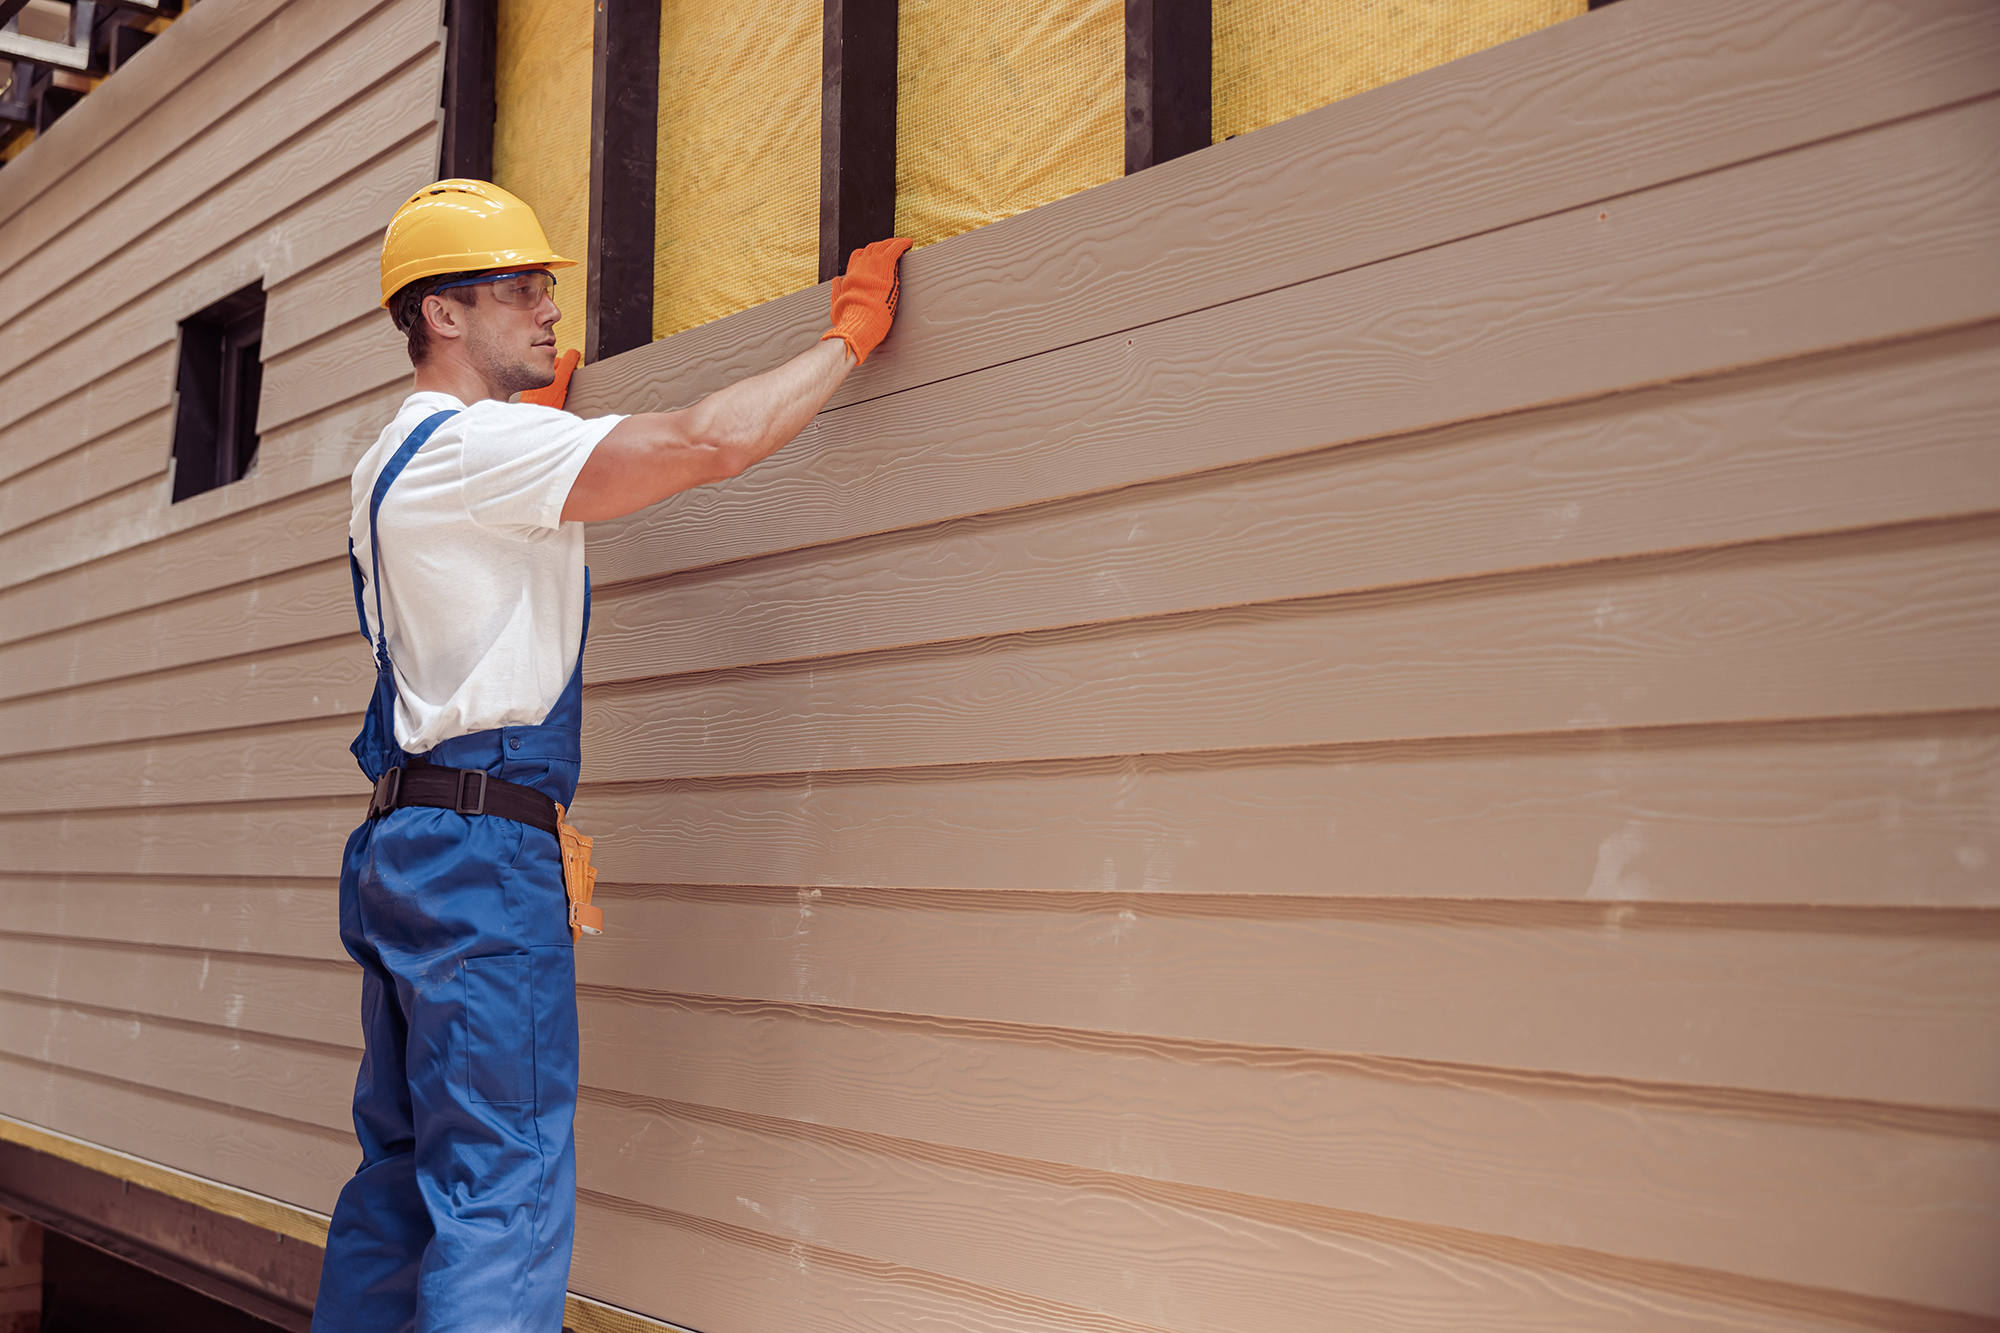 A person wearing a hard hat and blue overalls installing siding to a home.